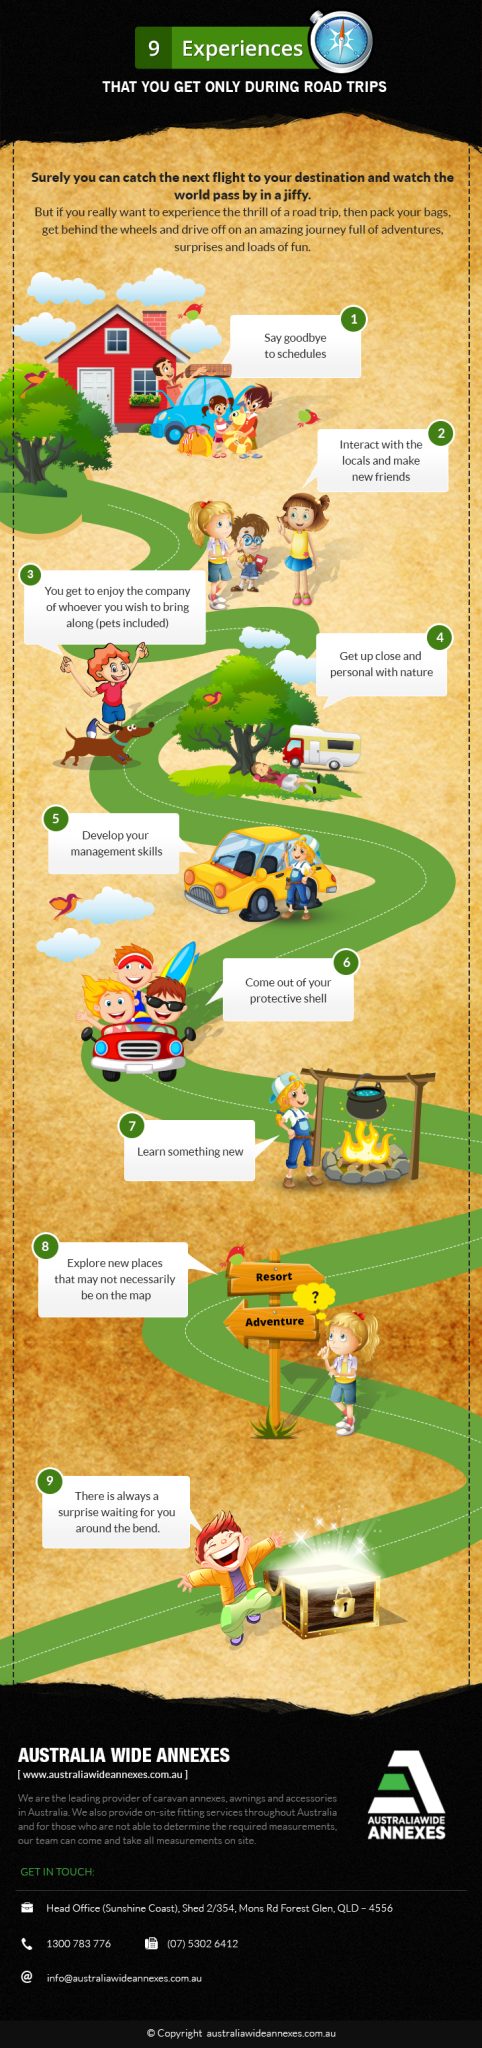 infographic 9 Experiences During Road Trips